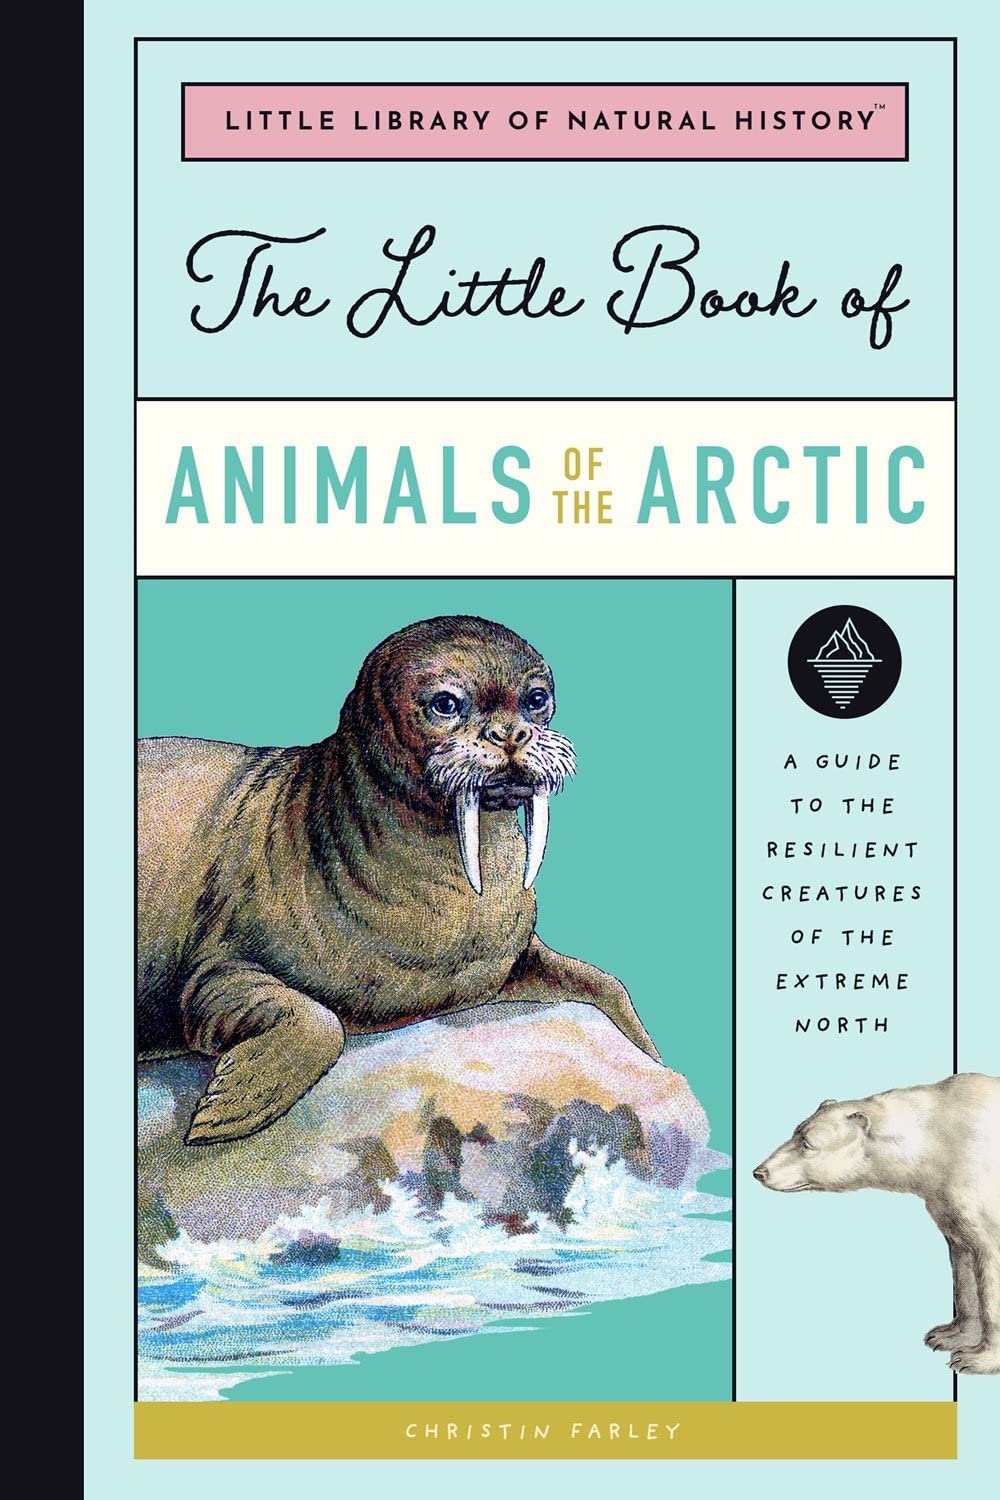 Little Book of Arctic Animals: A Guide to the Resilient Creatures of the Extreme North